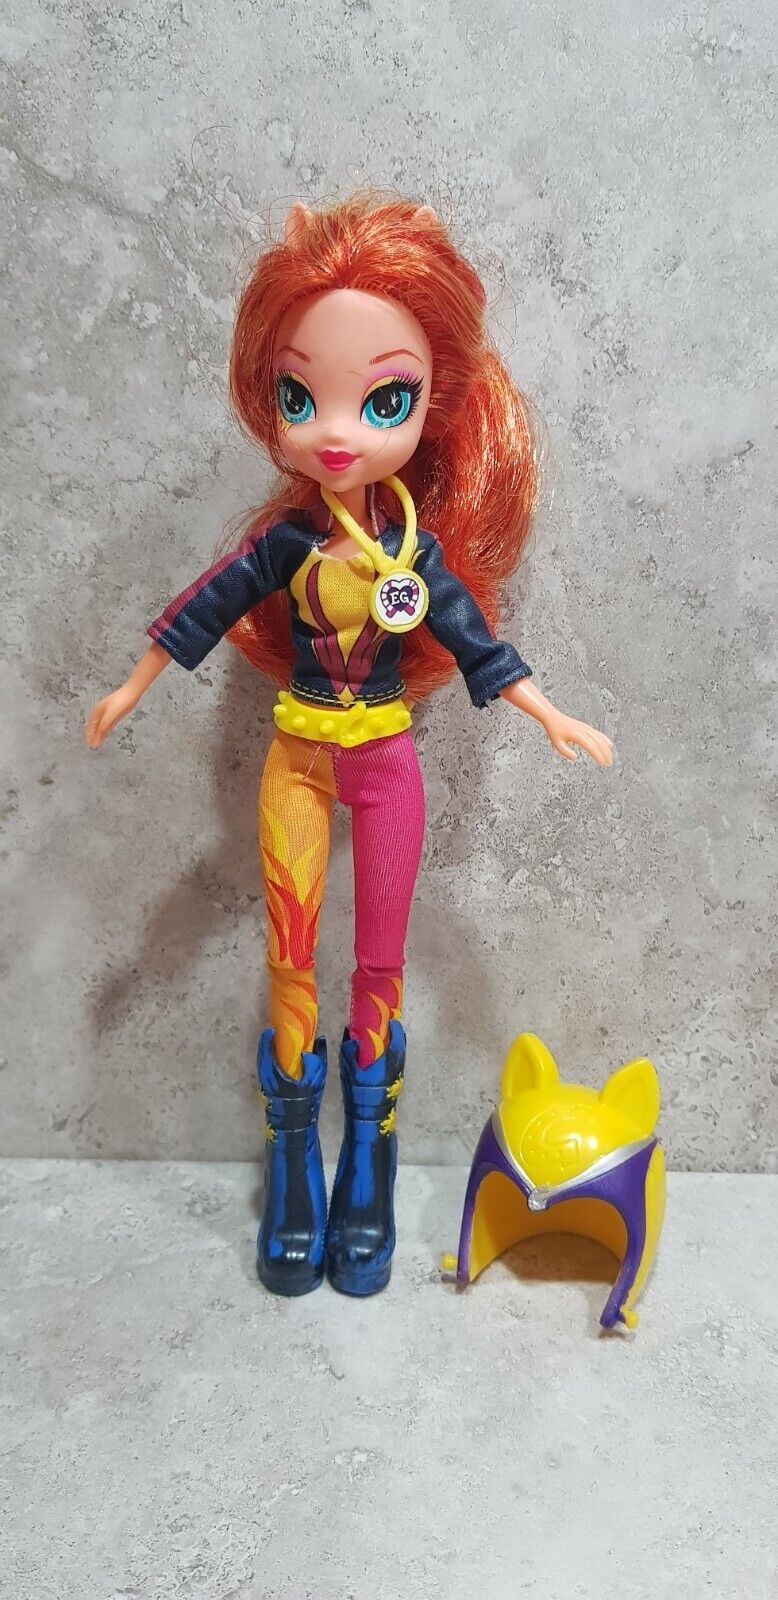 My Little Pony Equestria Girls Sunset Shimmer Friendship Games Sporty Style